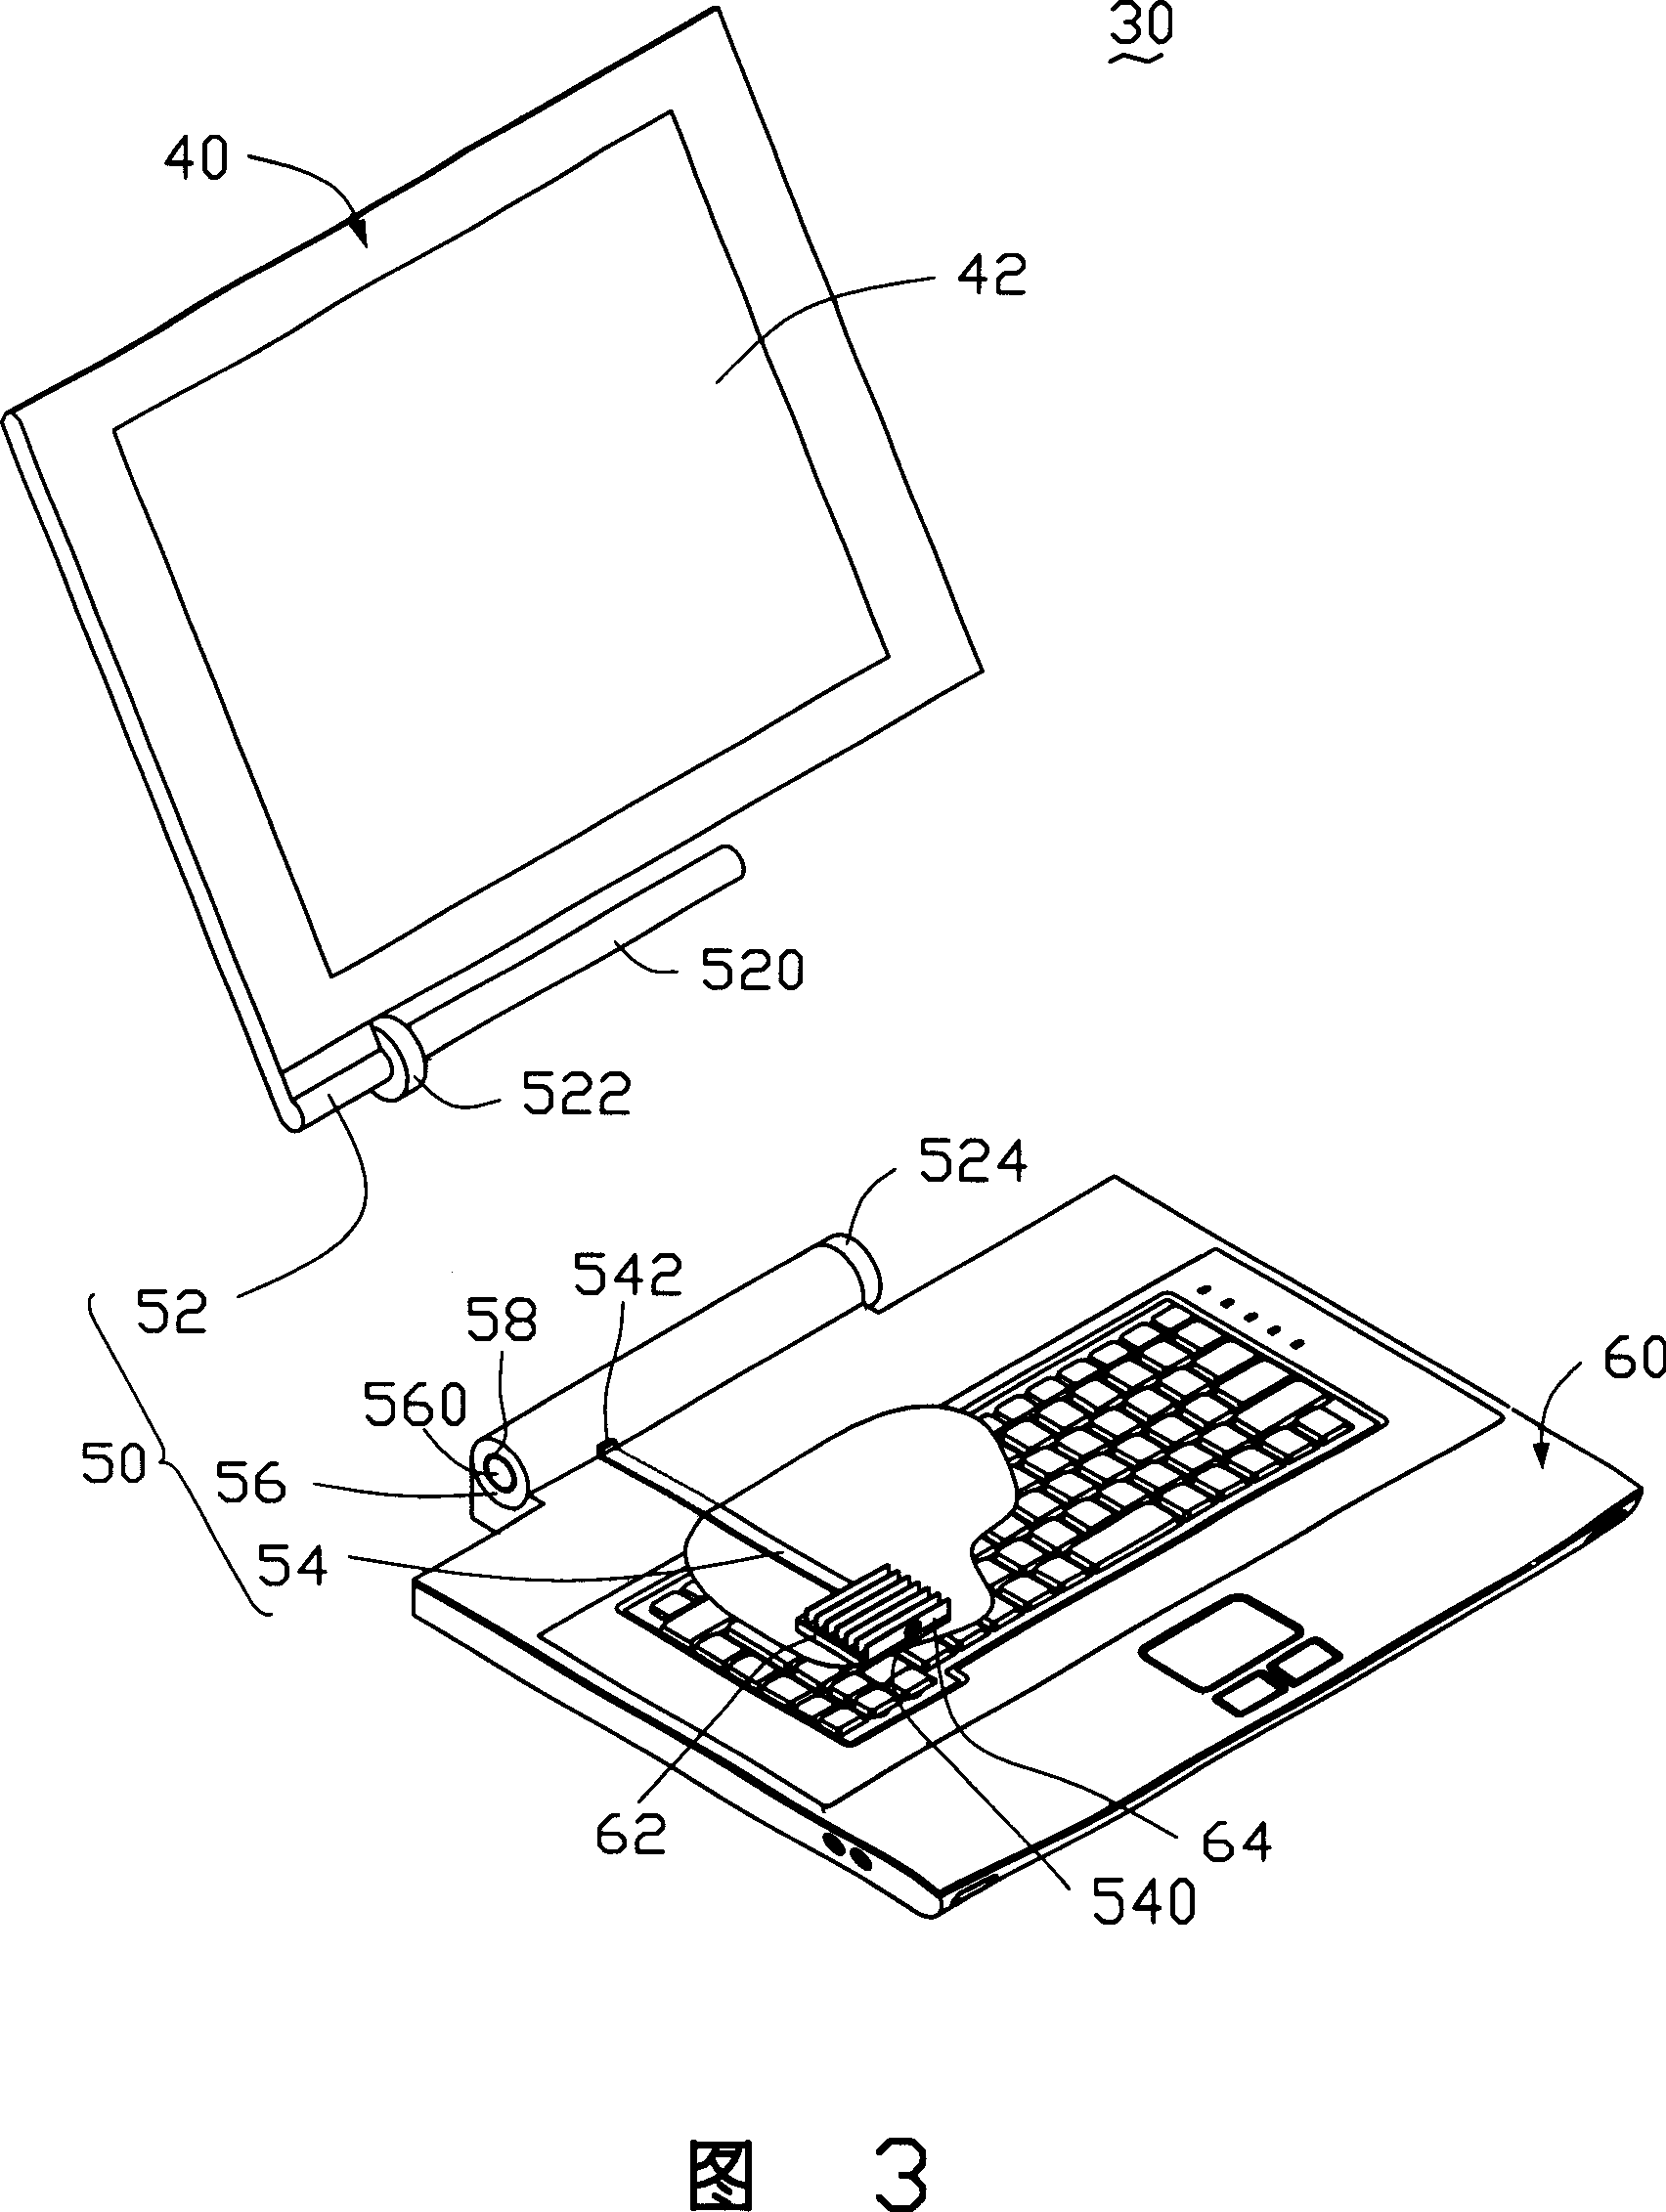 Note-book type computer